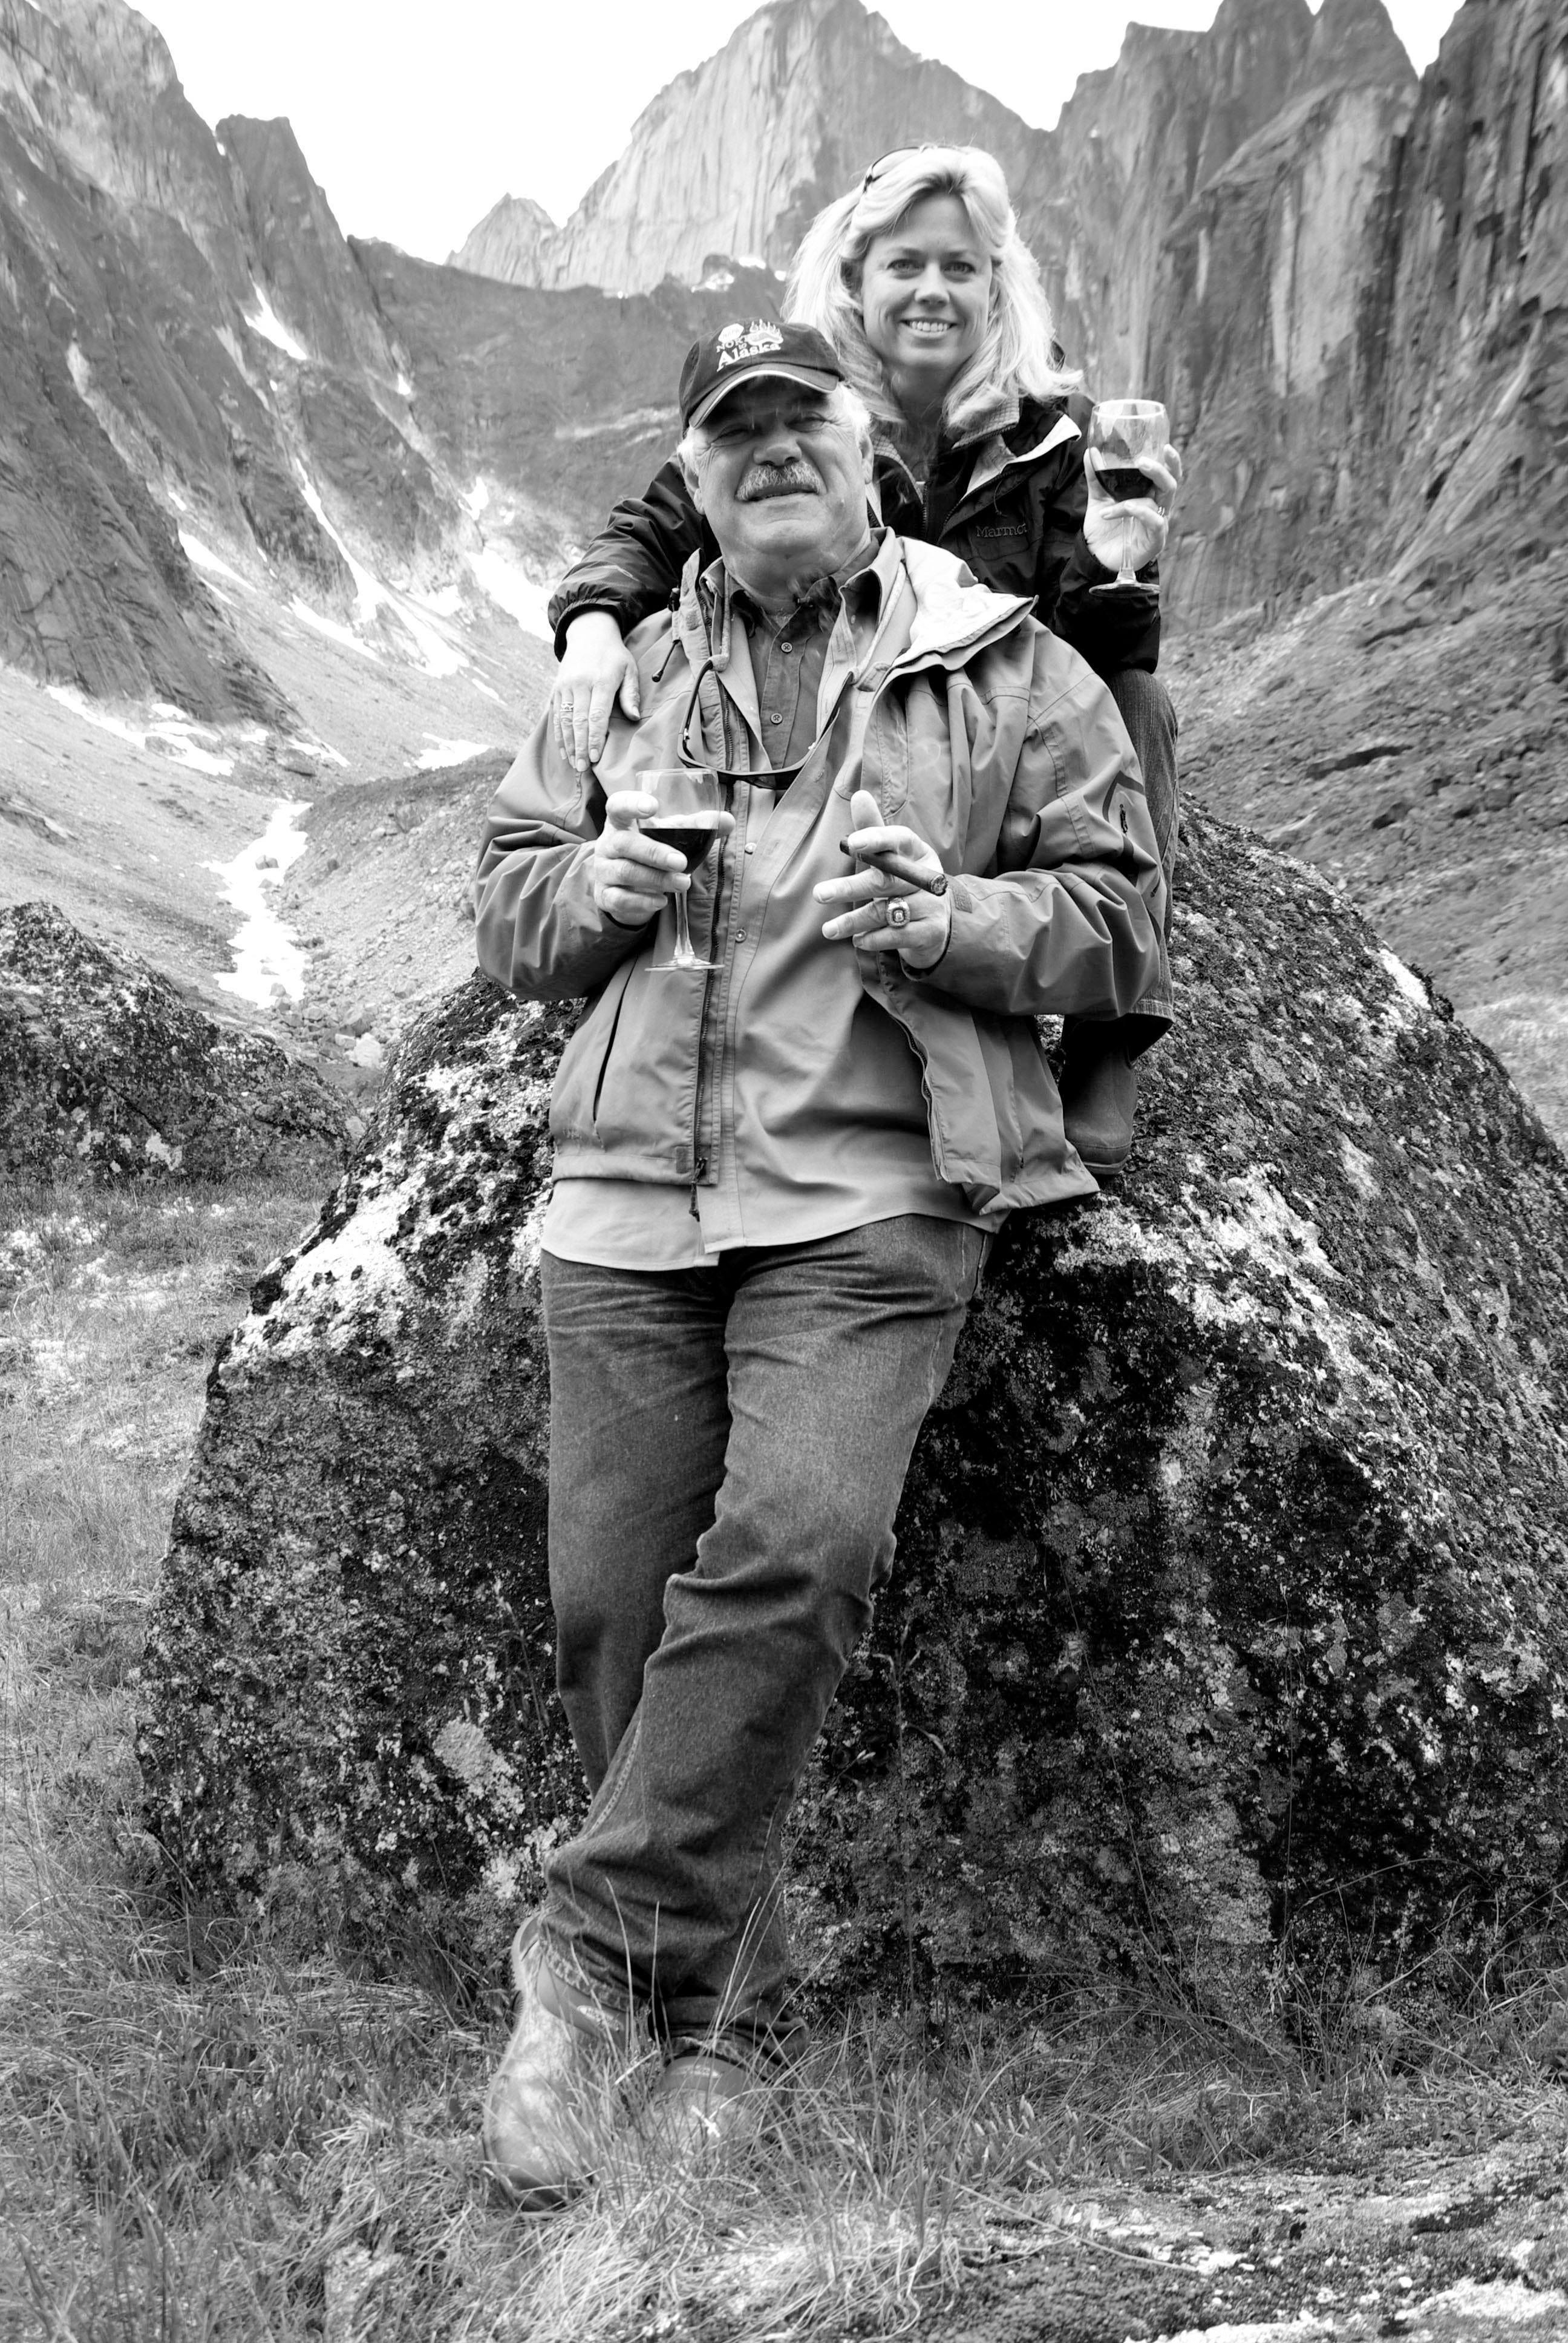 Stow native Larry Csonka with his life and business partner, Audrey Bradshaw, in Alaska. They own ZONK! Productions. Bradshaw orchestrates publicity, communications and marketing for Csonka, a member of the Pro Football Hall of Fame.